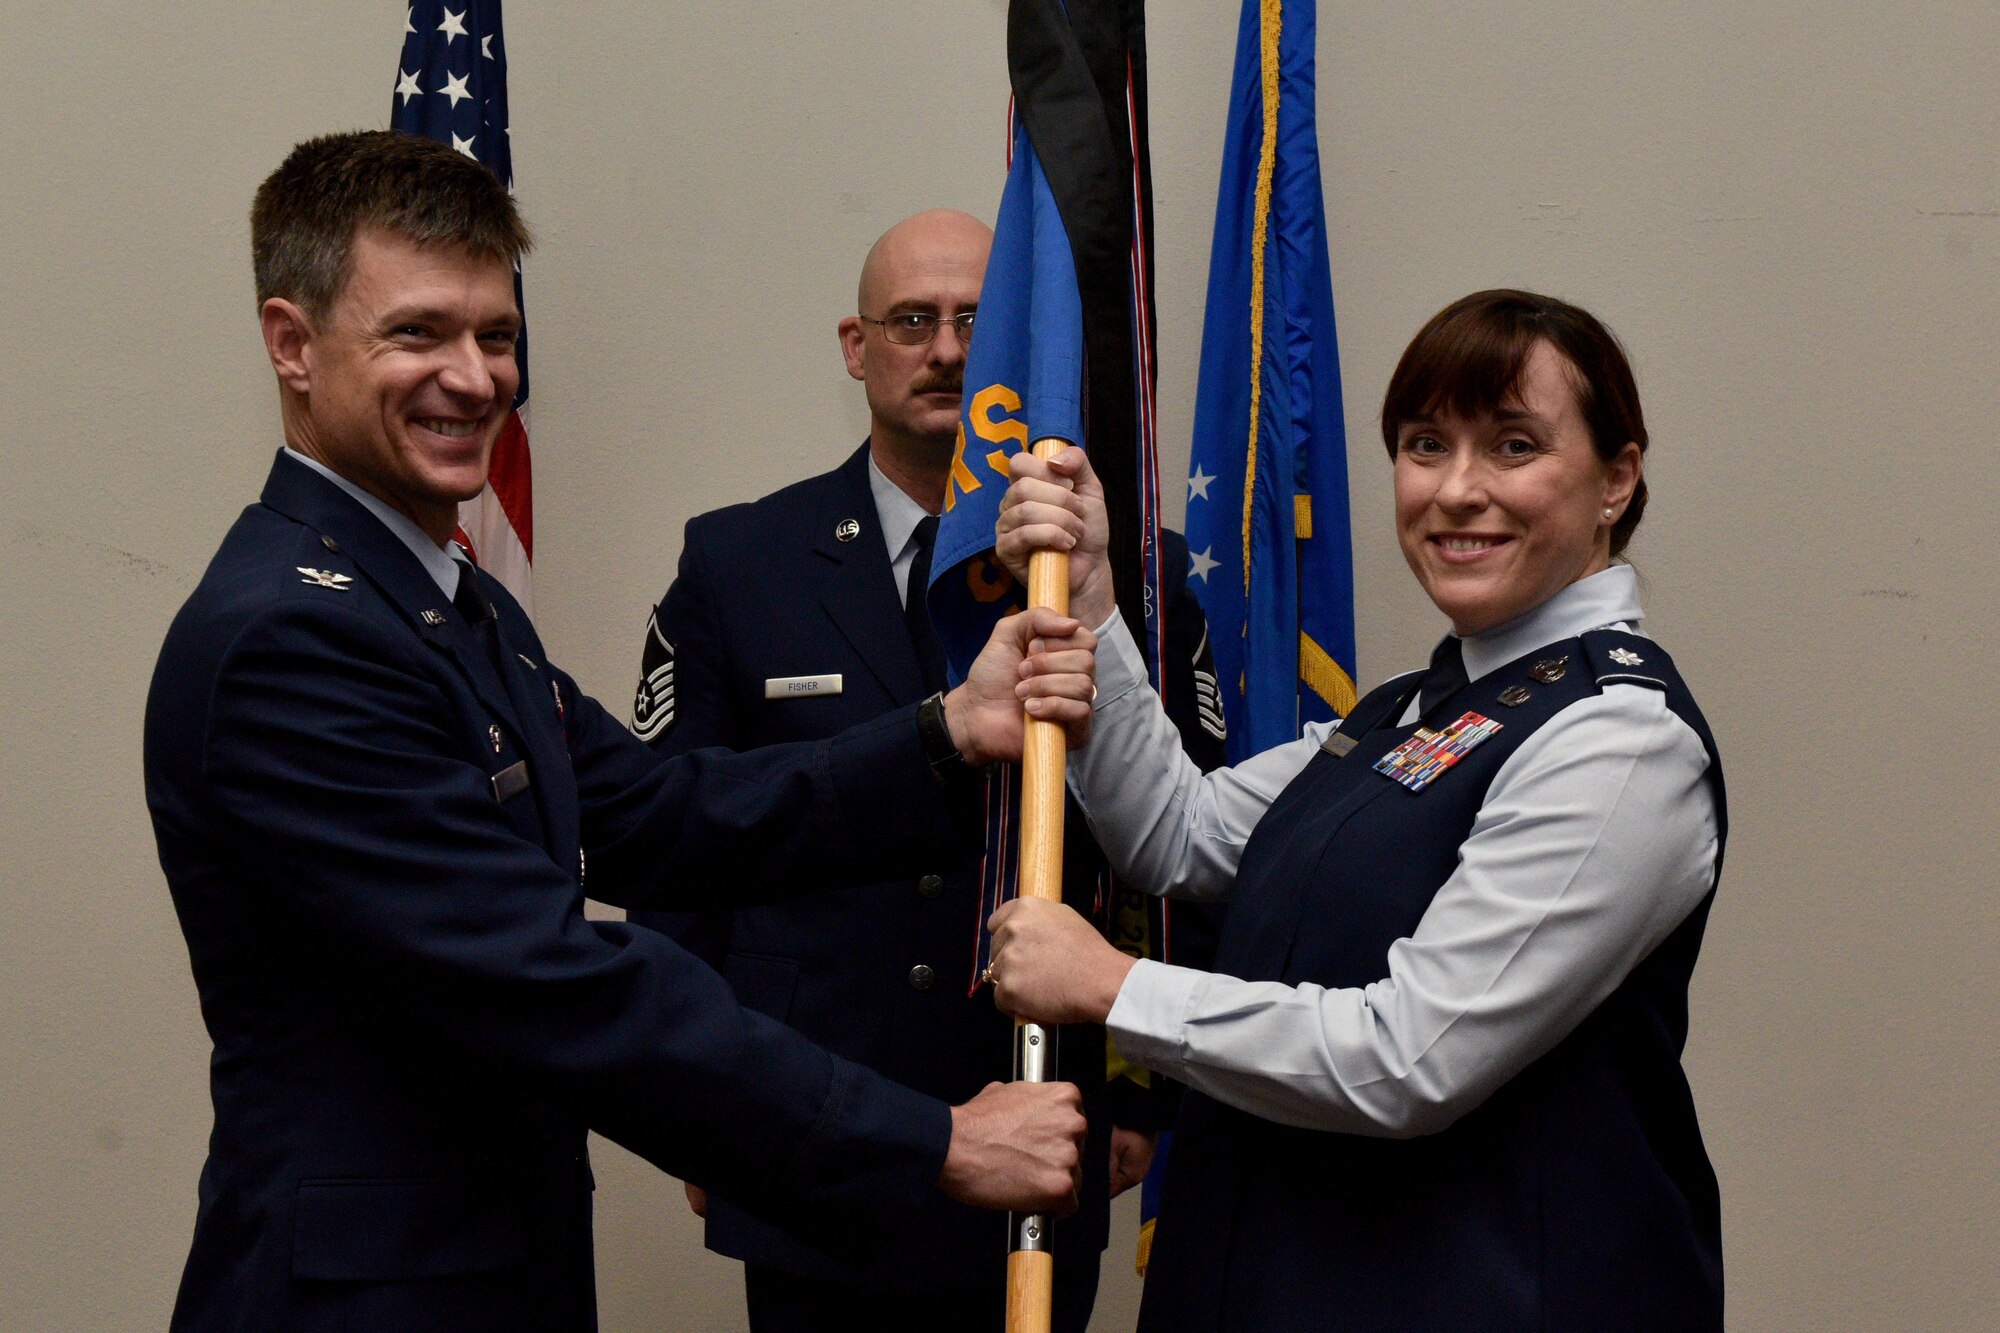 U.S. Air Force Col. Thomas Coakley, 17th Training Group commander, gives the guideon to Lt. Col. Amber Saldaña, 17th Training Squadron incoming commander, during the 17th TRSS Change of Command in the Event Center on Goodfellow Air Force Base, Texas, August 14, 2018. The passing of the guideon symbolizes the passing of command from one commander to the next. (U.S. Air Force photo by Senior Airman Randall Moose/Released)